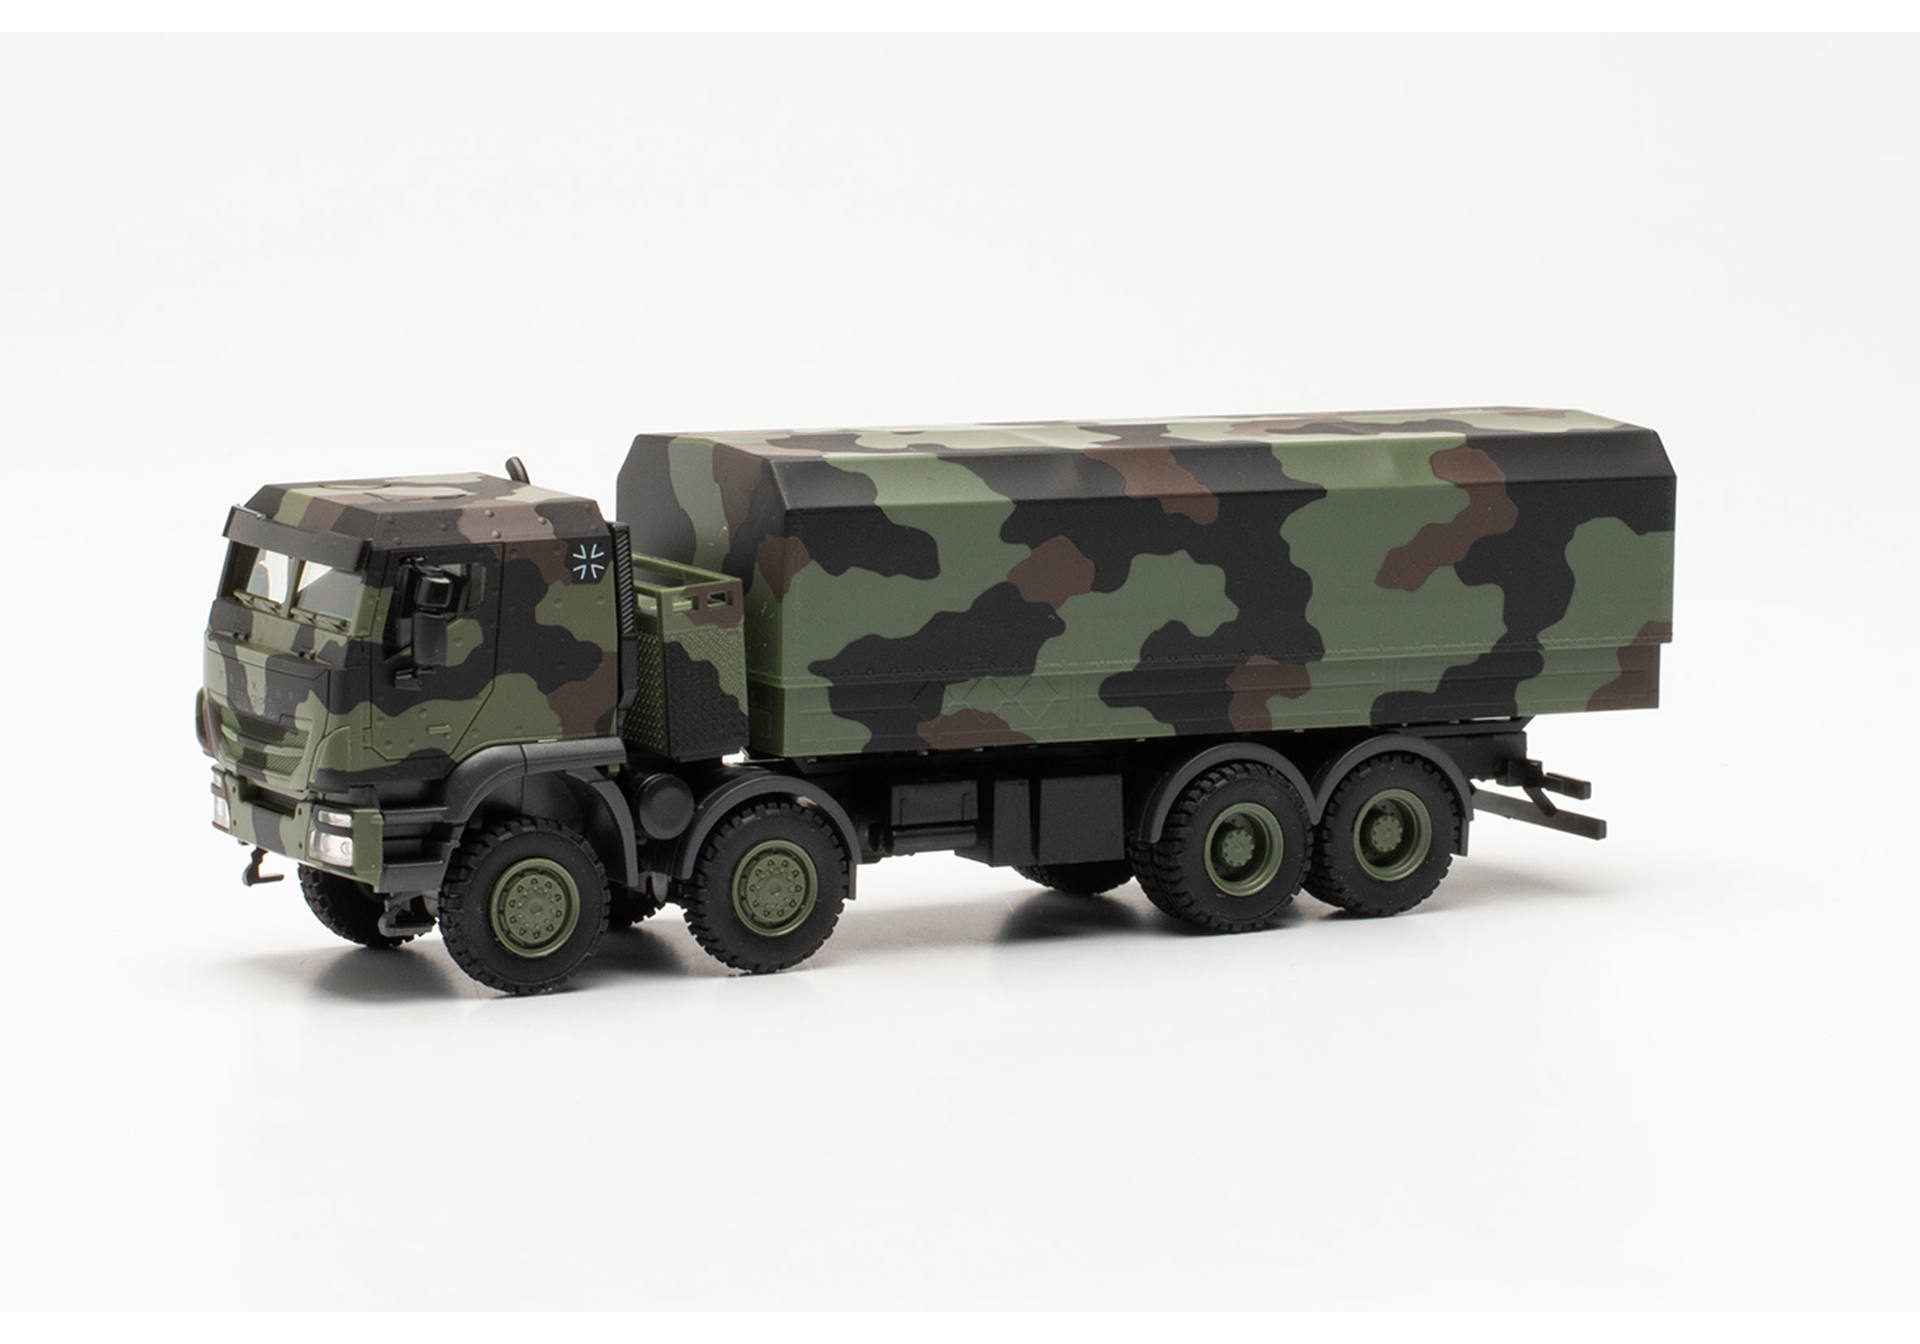 Iveco Trakker 8x8 protected flatbed truck, camouflage design